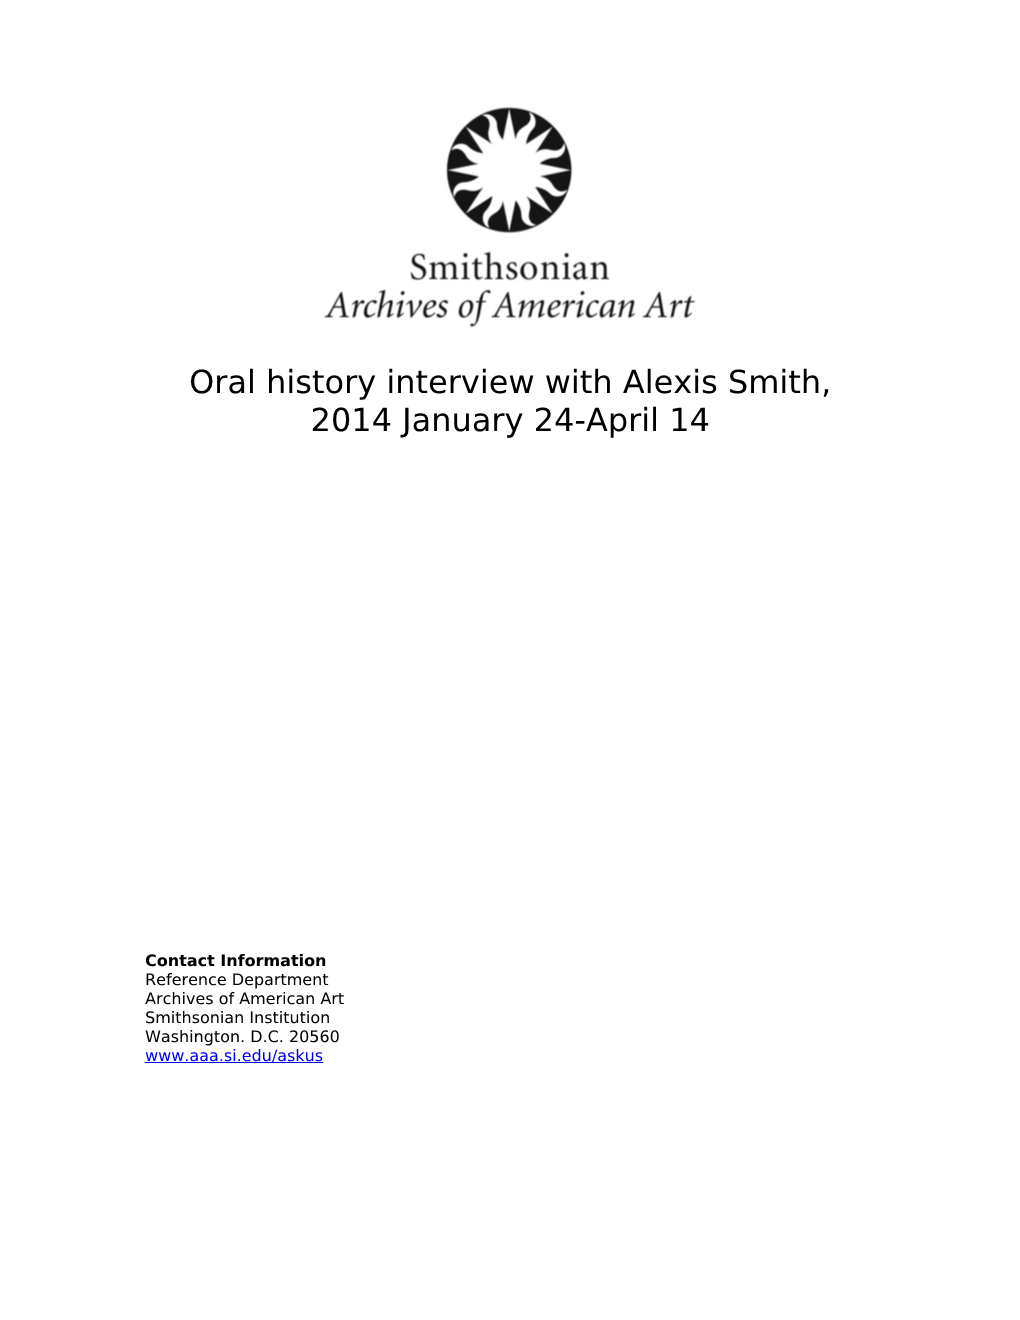 Oral History Interview with Alexis Smith, 2014 January 24-April 14